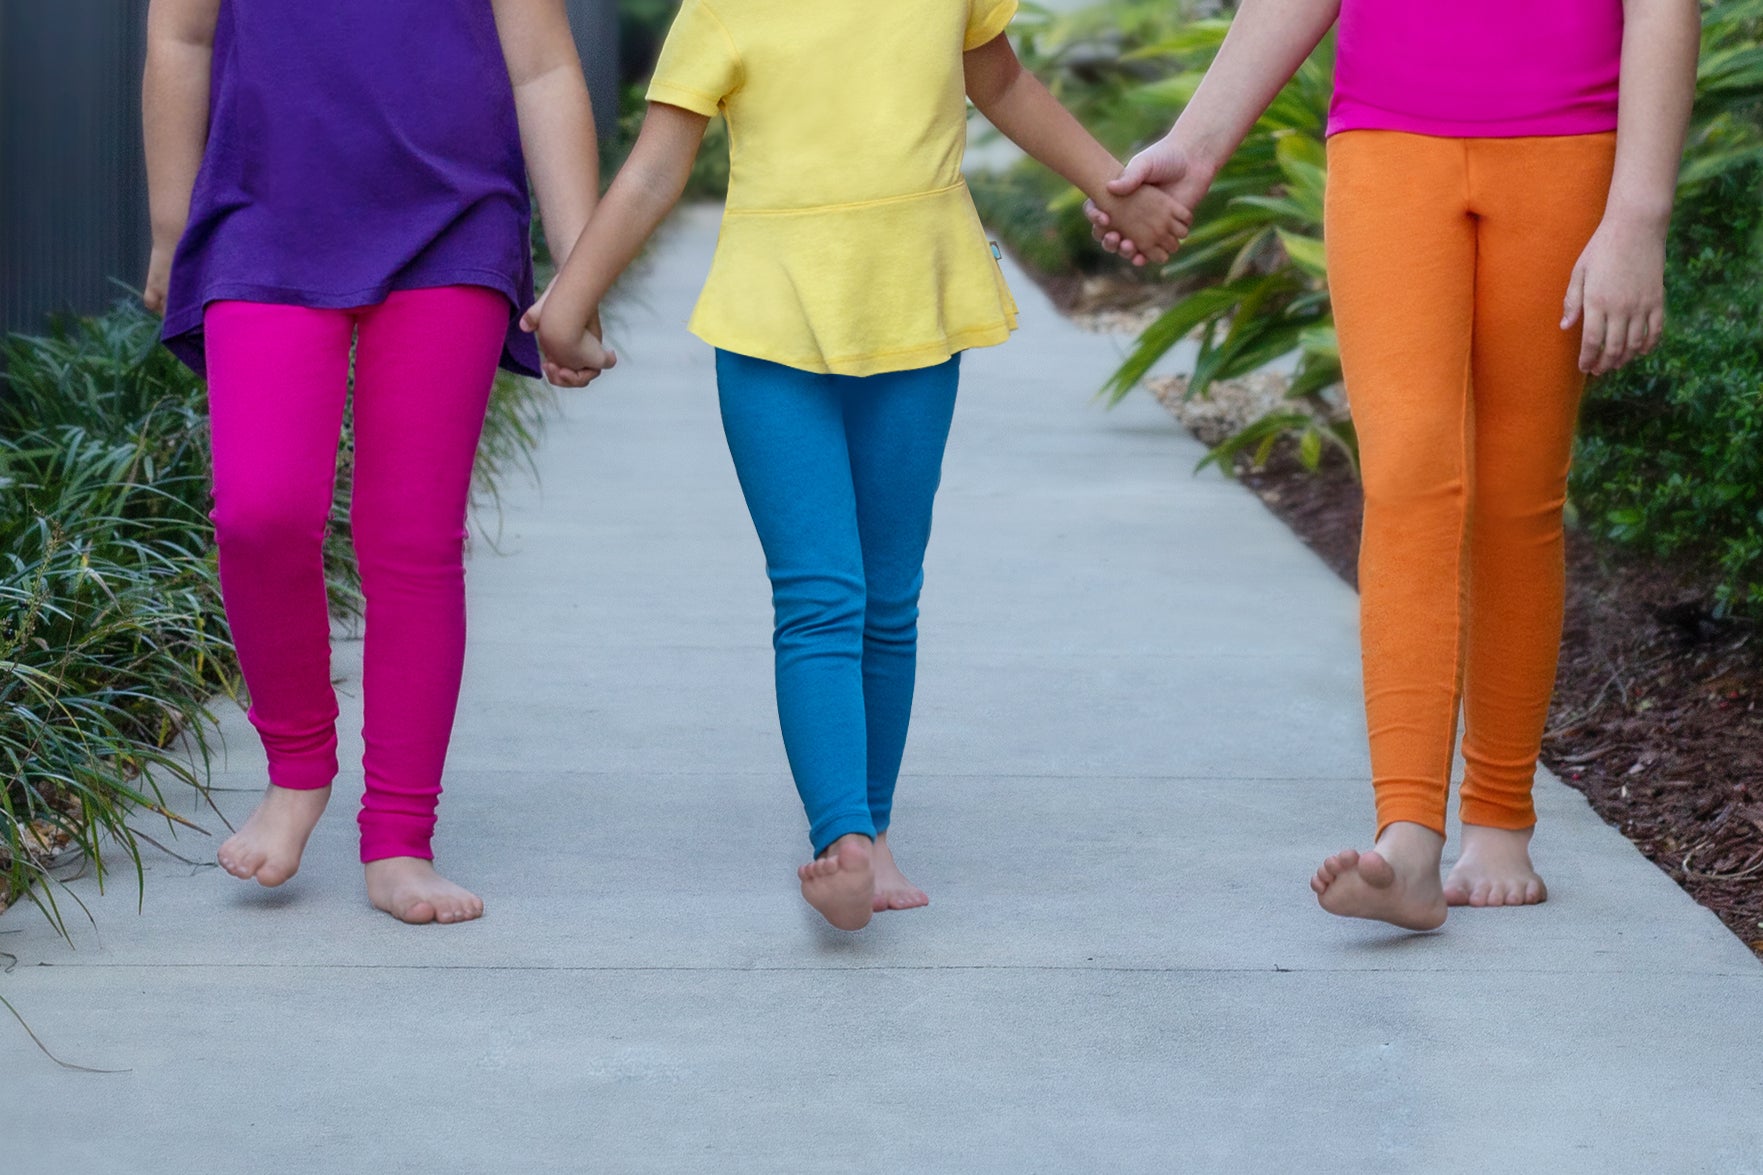 Girls' TOUGH COTTON™ Fitted Utility Leggings